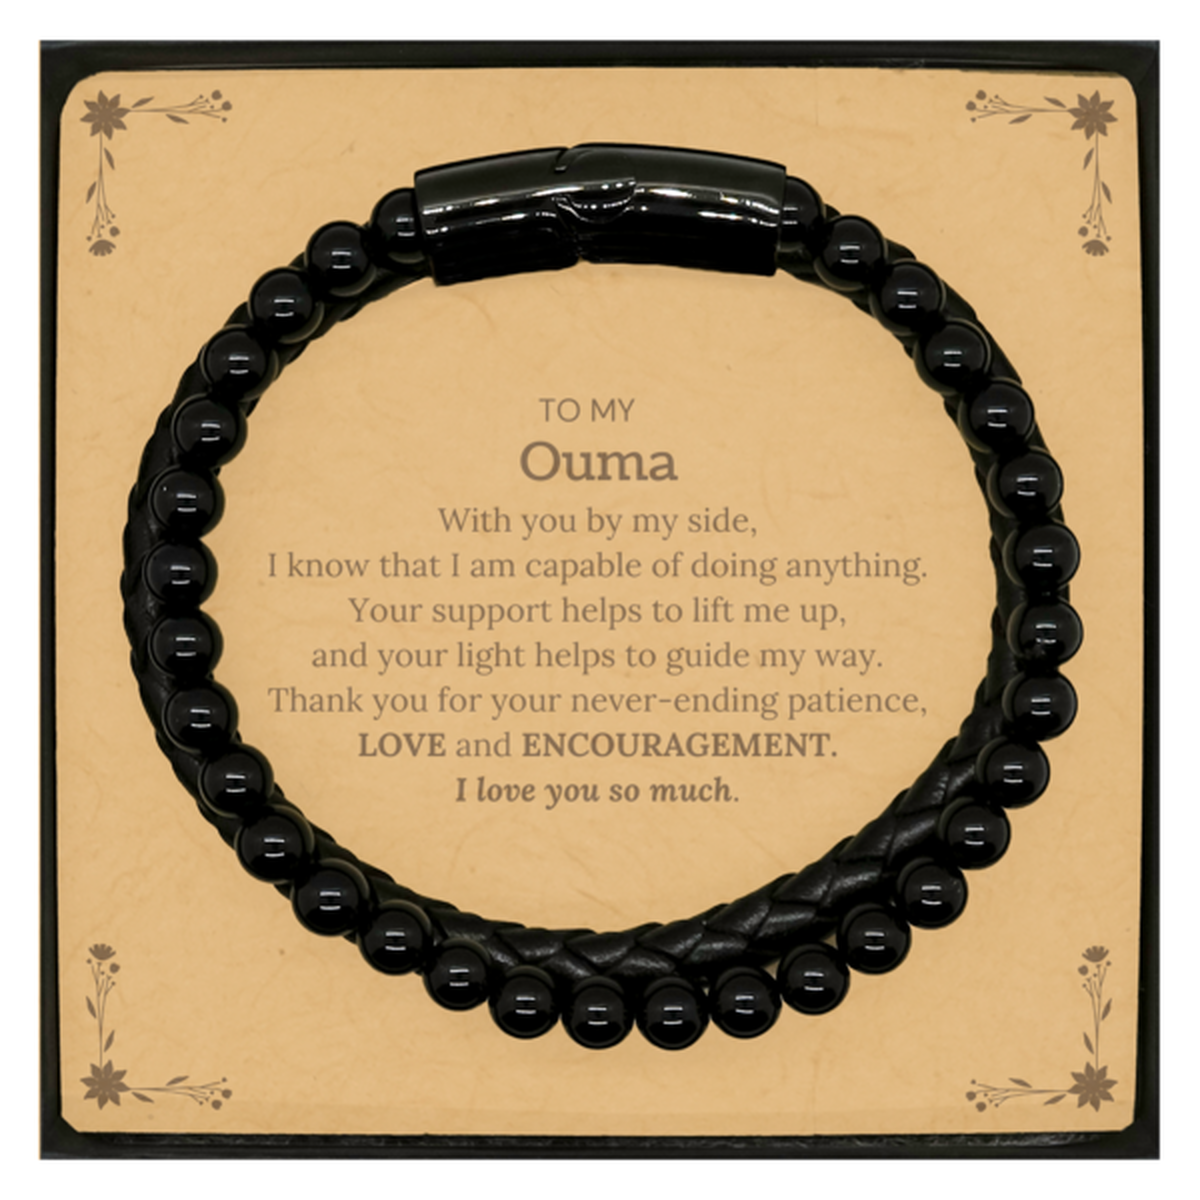 Appreciation Ouma Stone Leather Bracelets Gifts, To My Ouma Birthday Christmas Wedding Keepsake Gifts for Ouma With you by my side, I know that I am capable of doing anything. I love you so much